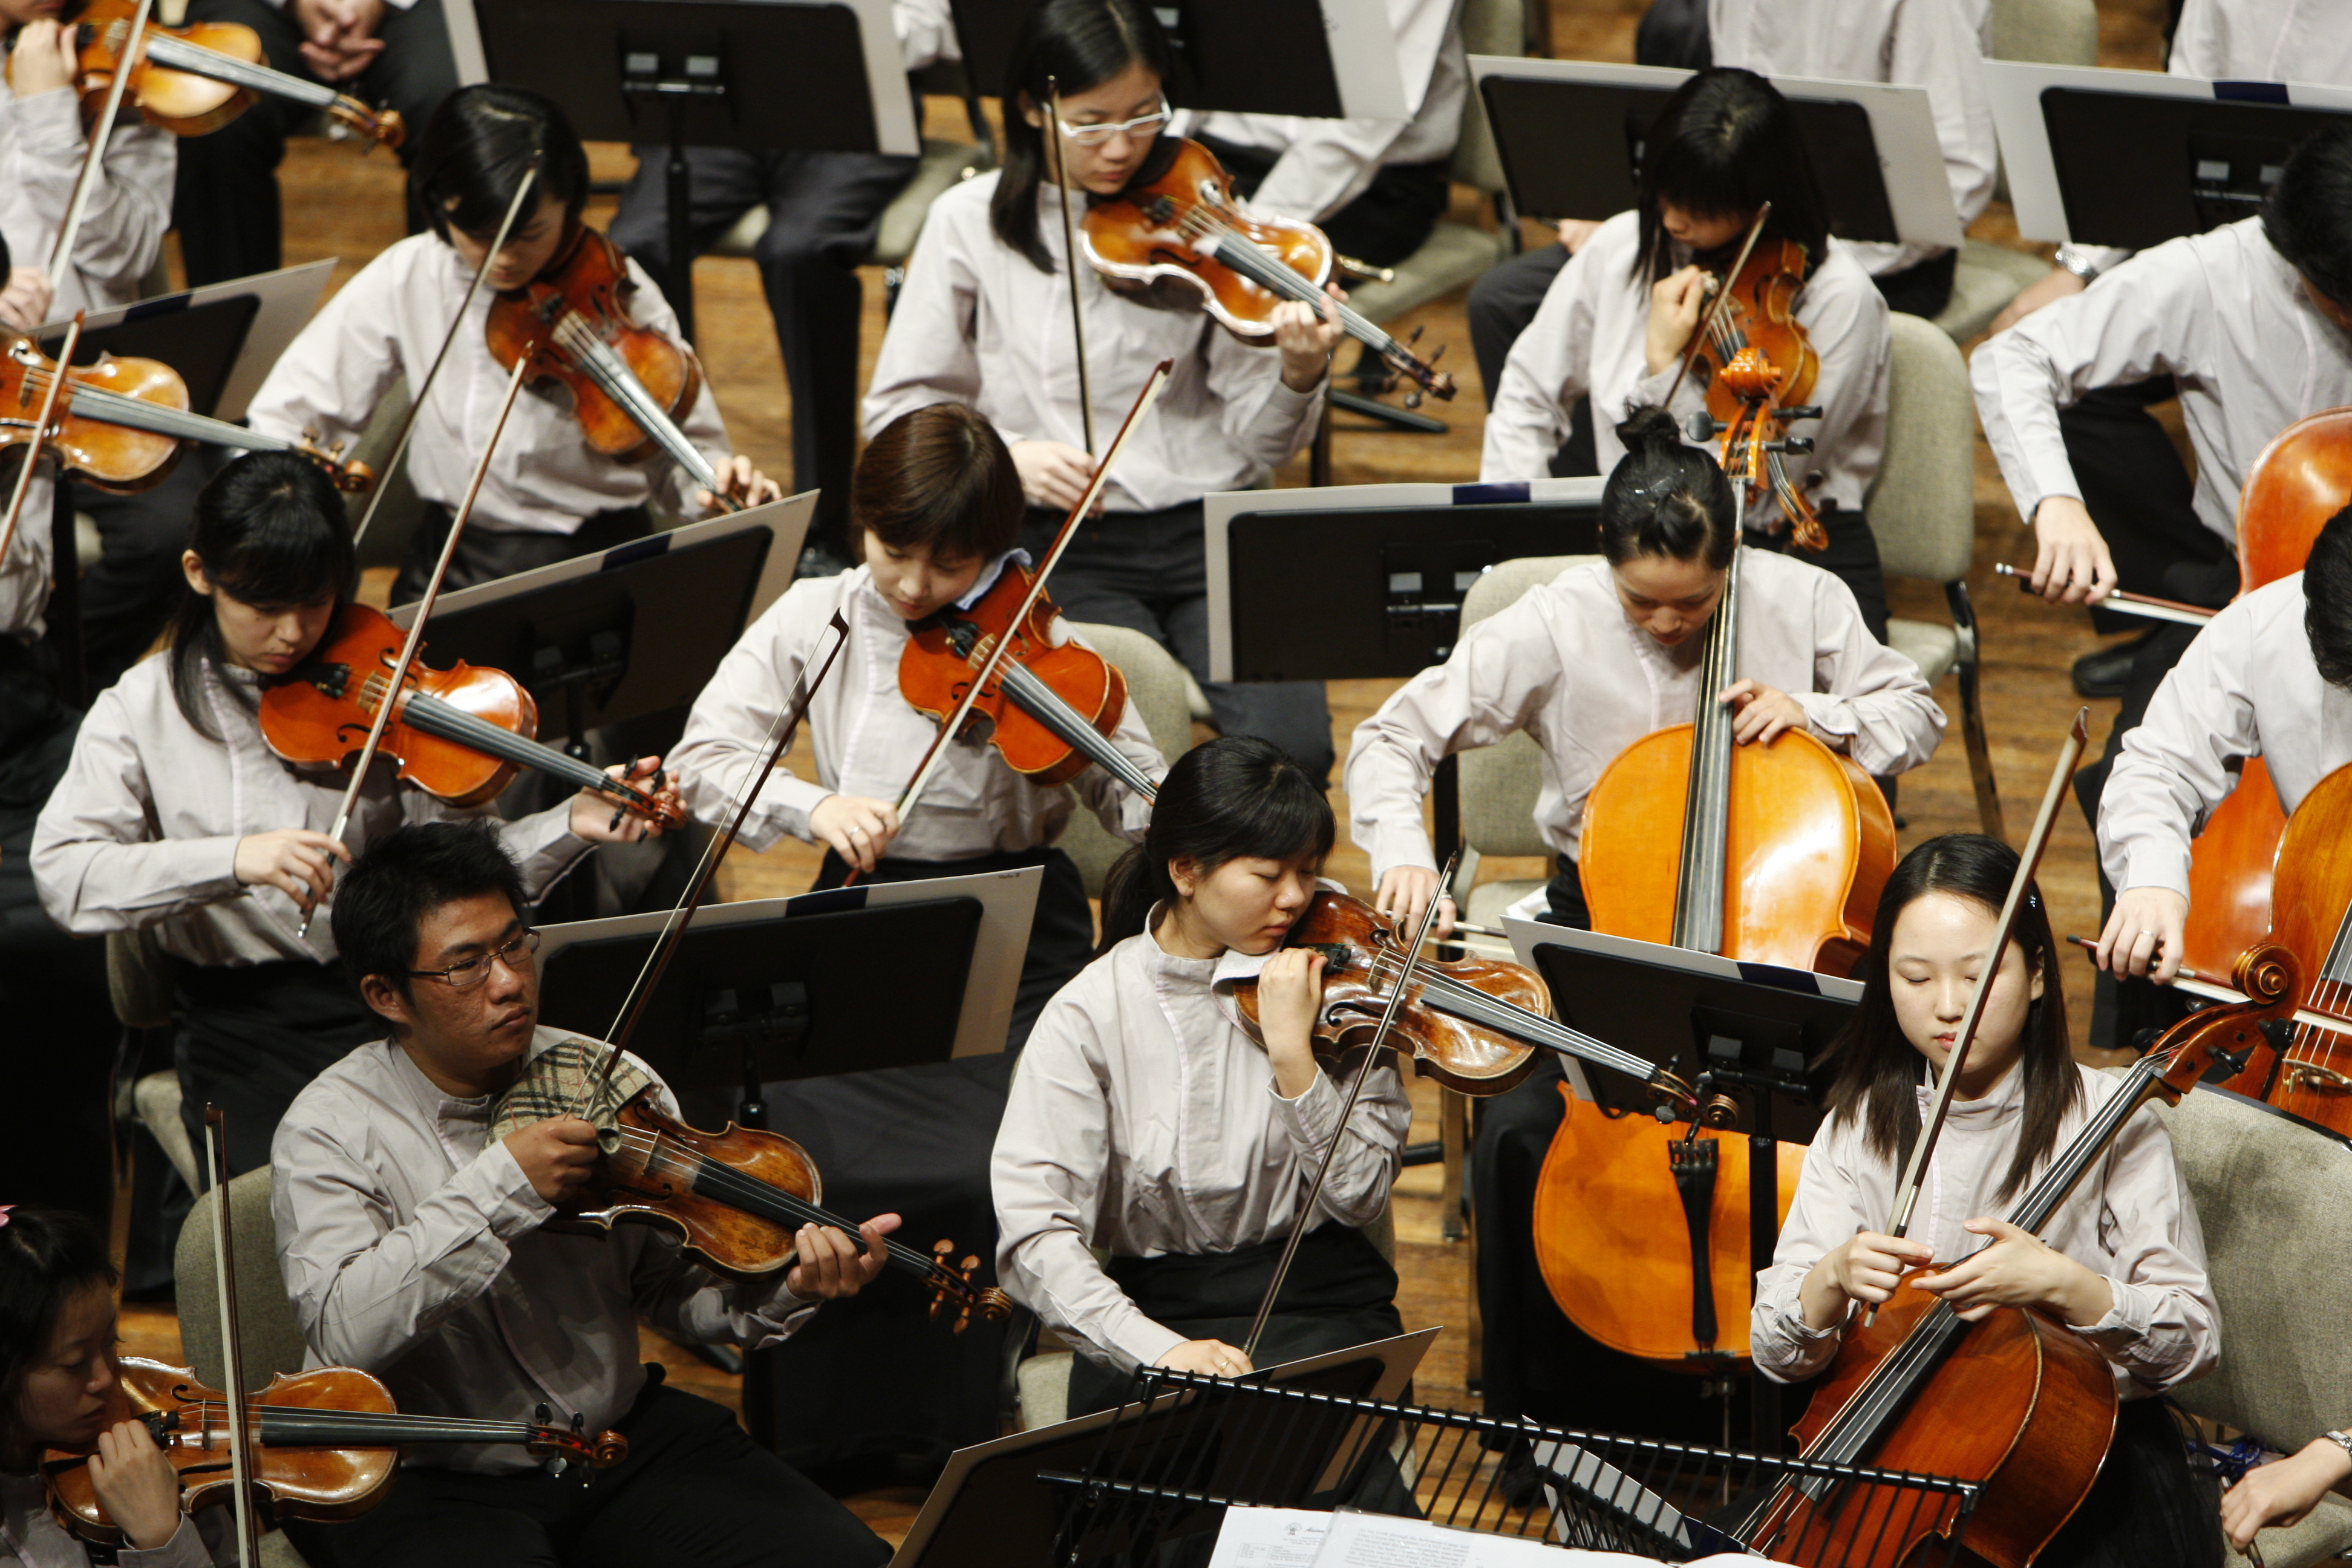 Each year the Asian Youth Orchestra brings together some 100 young players from across East Asia. In 2008 (above) the orchestra notably featured players from both North and South Korea.